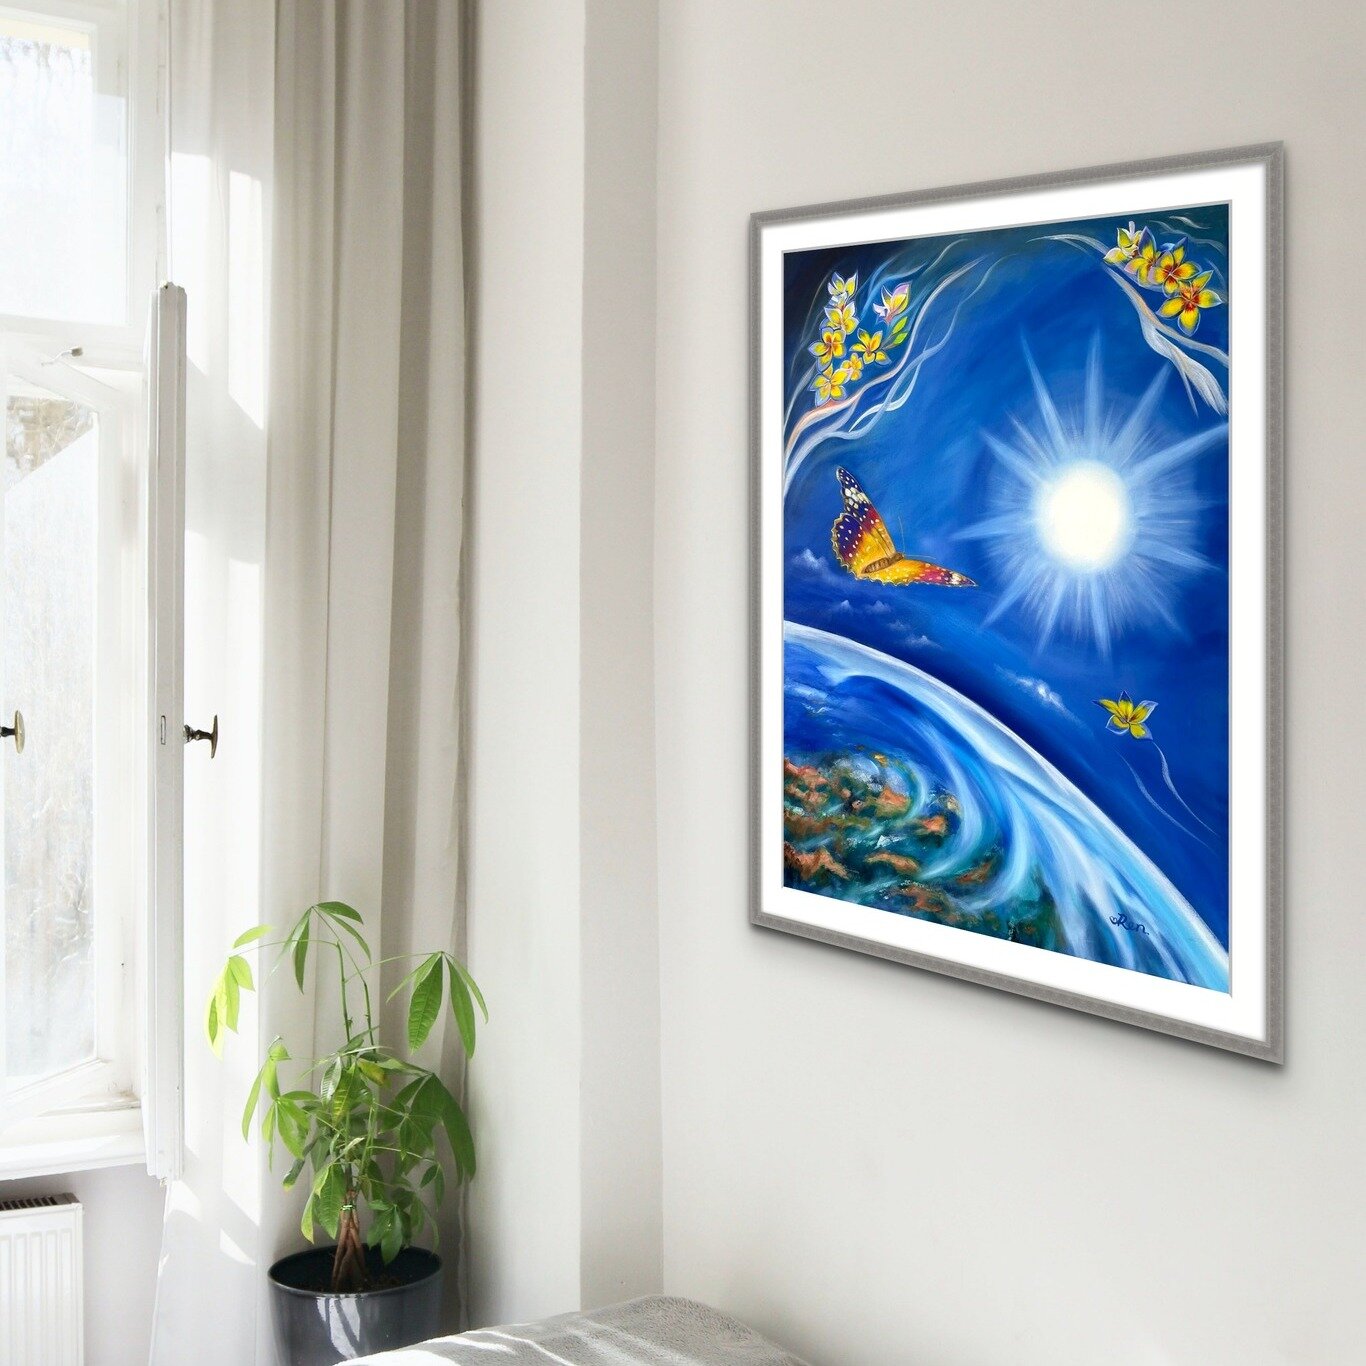 ✨ Find Your Light: &quot;Our Star&quot; Spirit Print by Jingmin Ren ✨

In times of struggle, a flicker of hope can feel like a distant star. But look closer, because even amid the darkness, there's always a spark waiting to ignite. ✨

Jingmin Ren's &